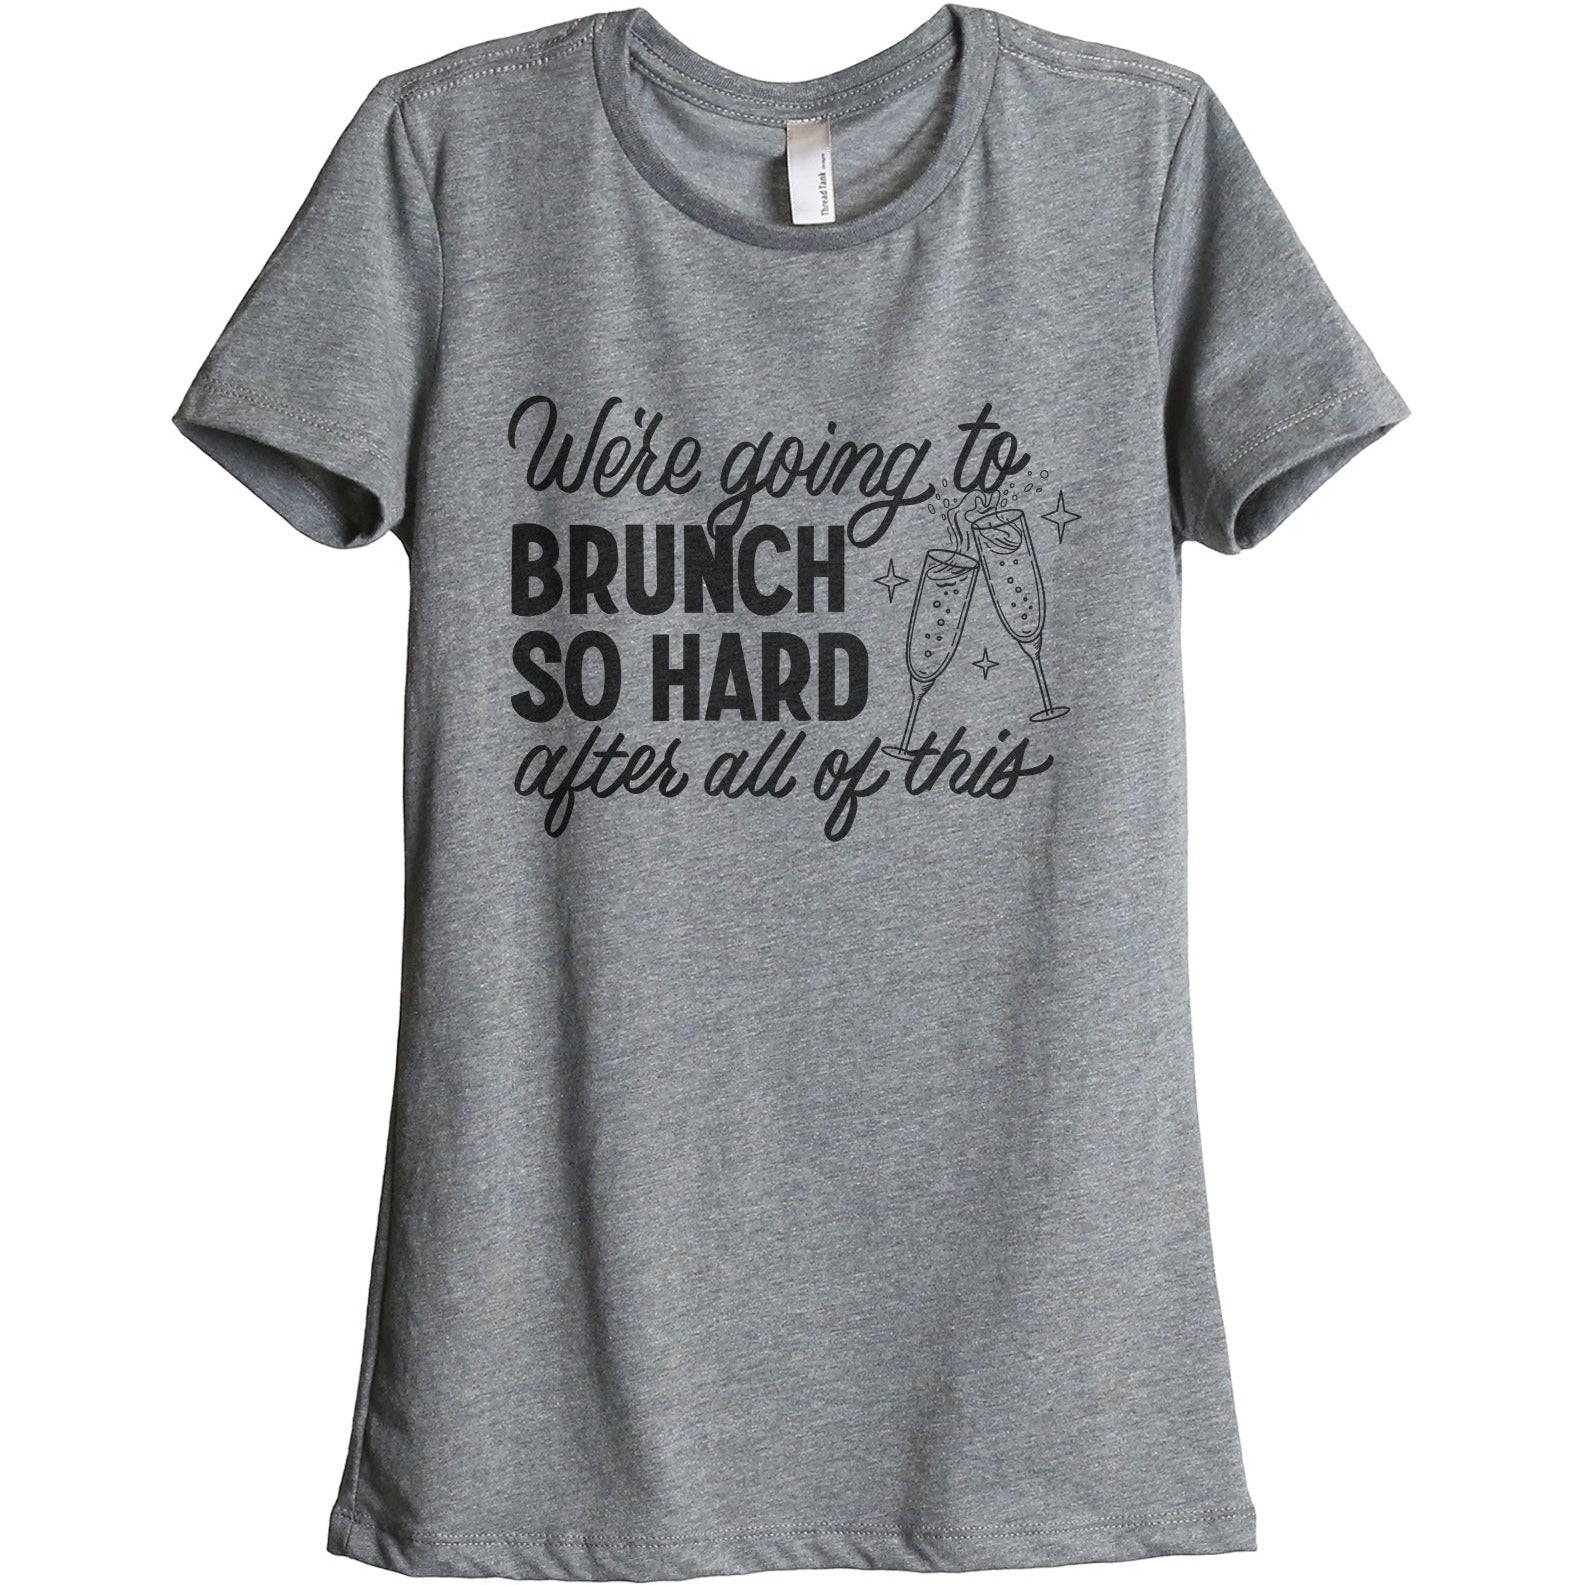 We're Going To Brunch So Hard After All Of This - Stories You Can Wear